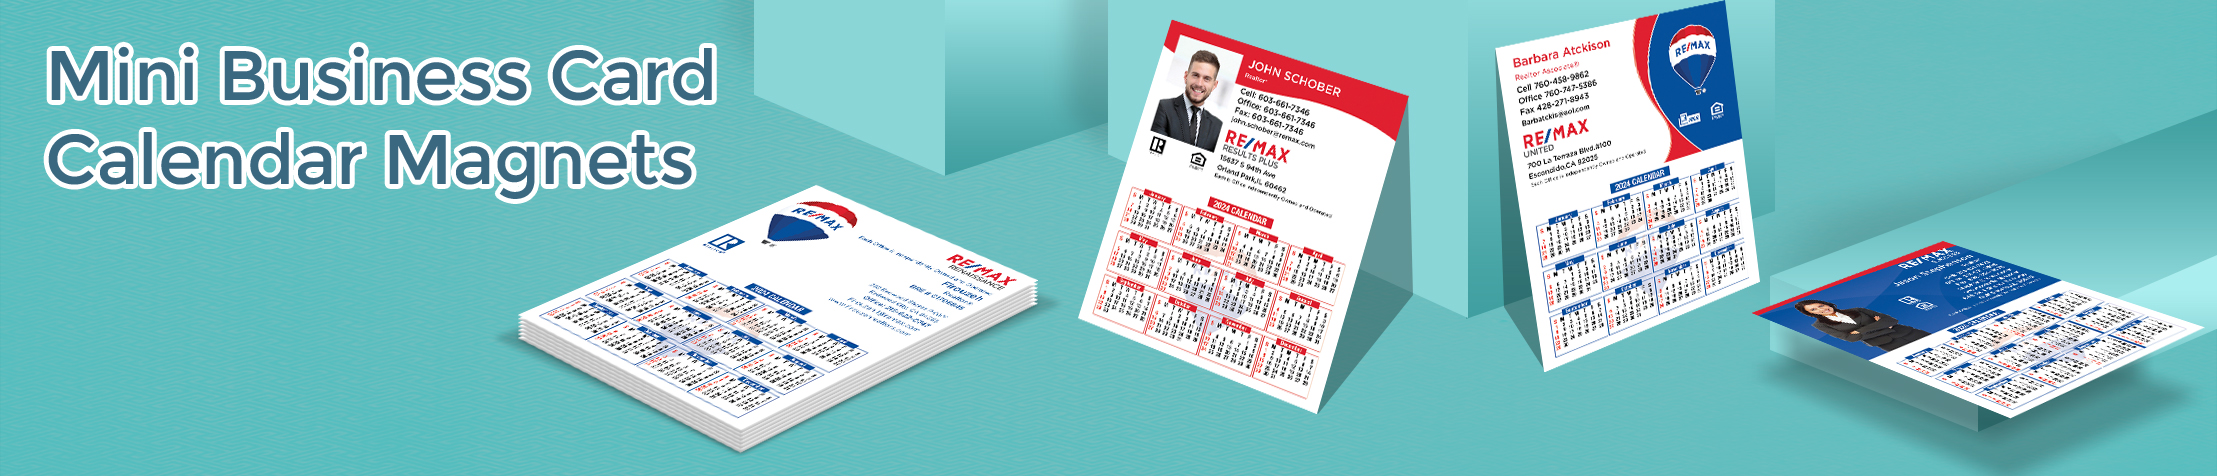 RE/MAX Real Estate Mini Business Card Calendar Magnets - RE/MAX 2019 calendars with photo and contact info, 3.5” by 4.25” | BestPrintBuy.com